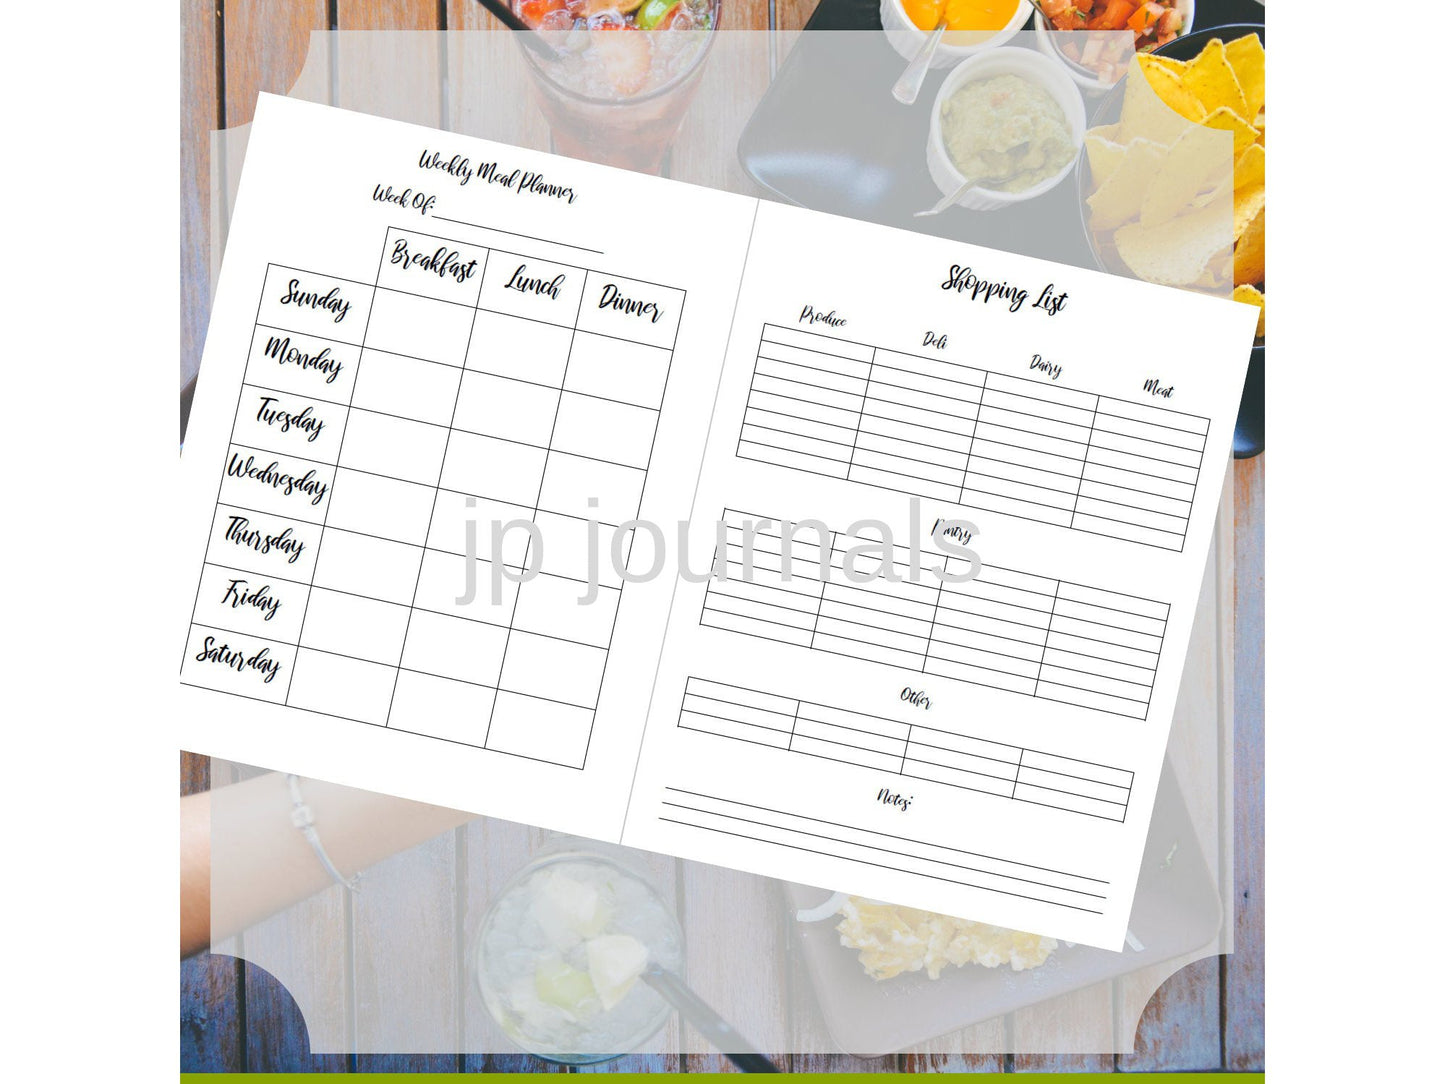 DIY Weekly Meal Planner and Shopping Grocery List Organizer Printable *INSTANT DOWNLOAD* Ideal for Diet Planning and Budget Shopping